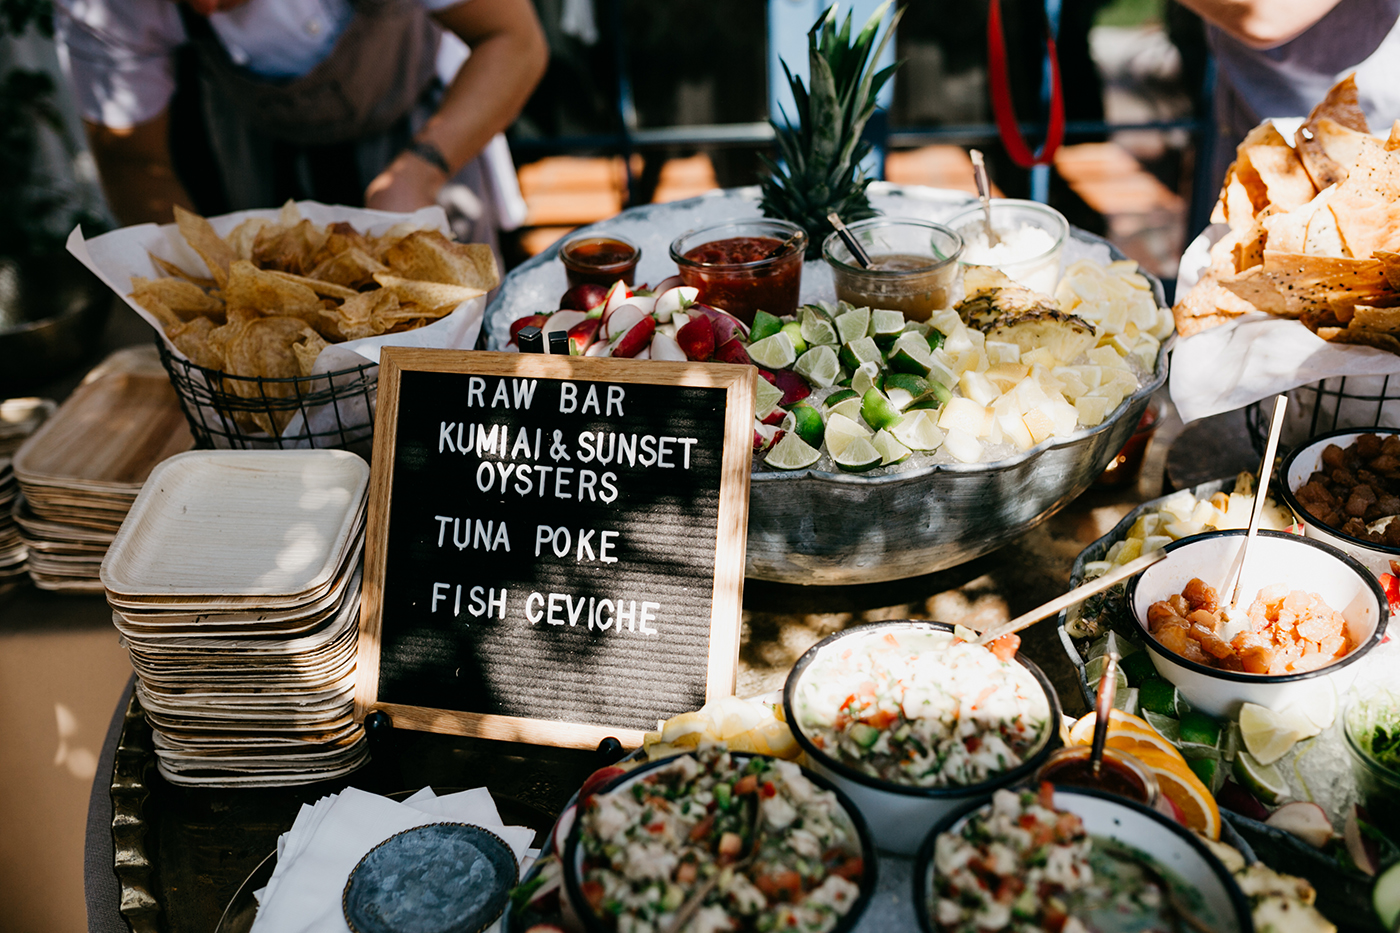 5 Wedding Catering Styles Which One is Right for Your Reception Menu 